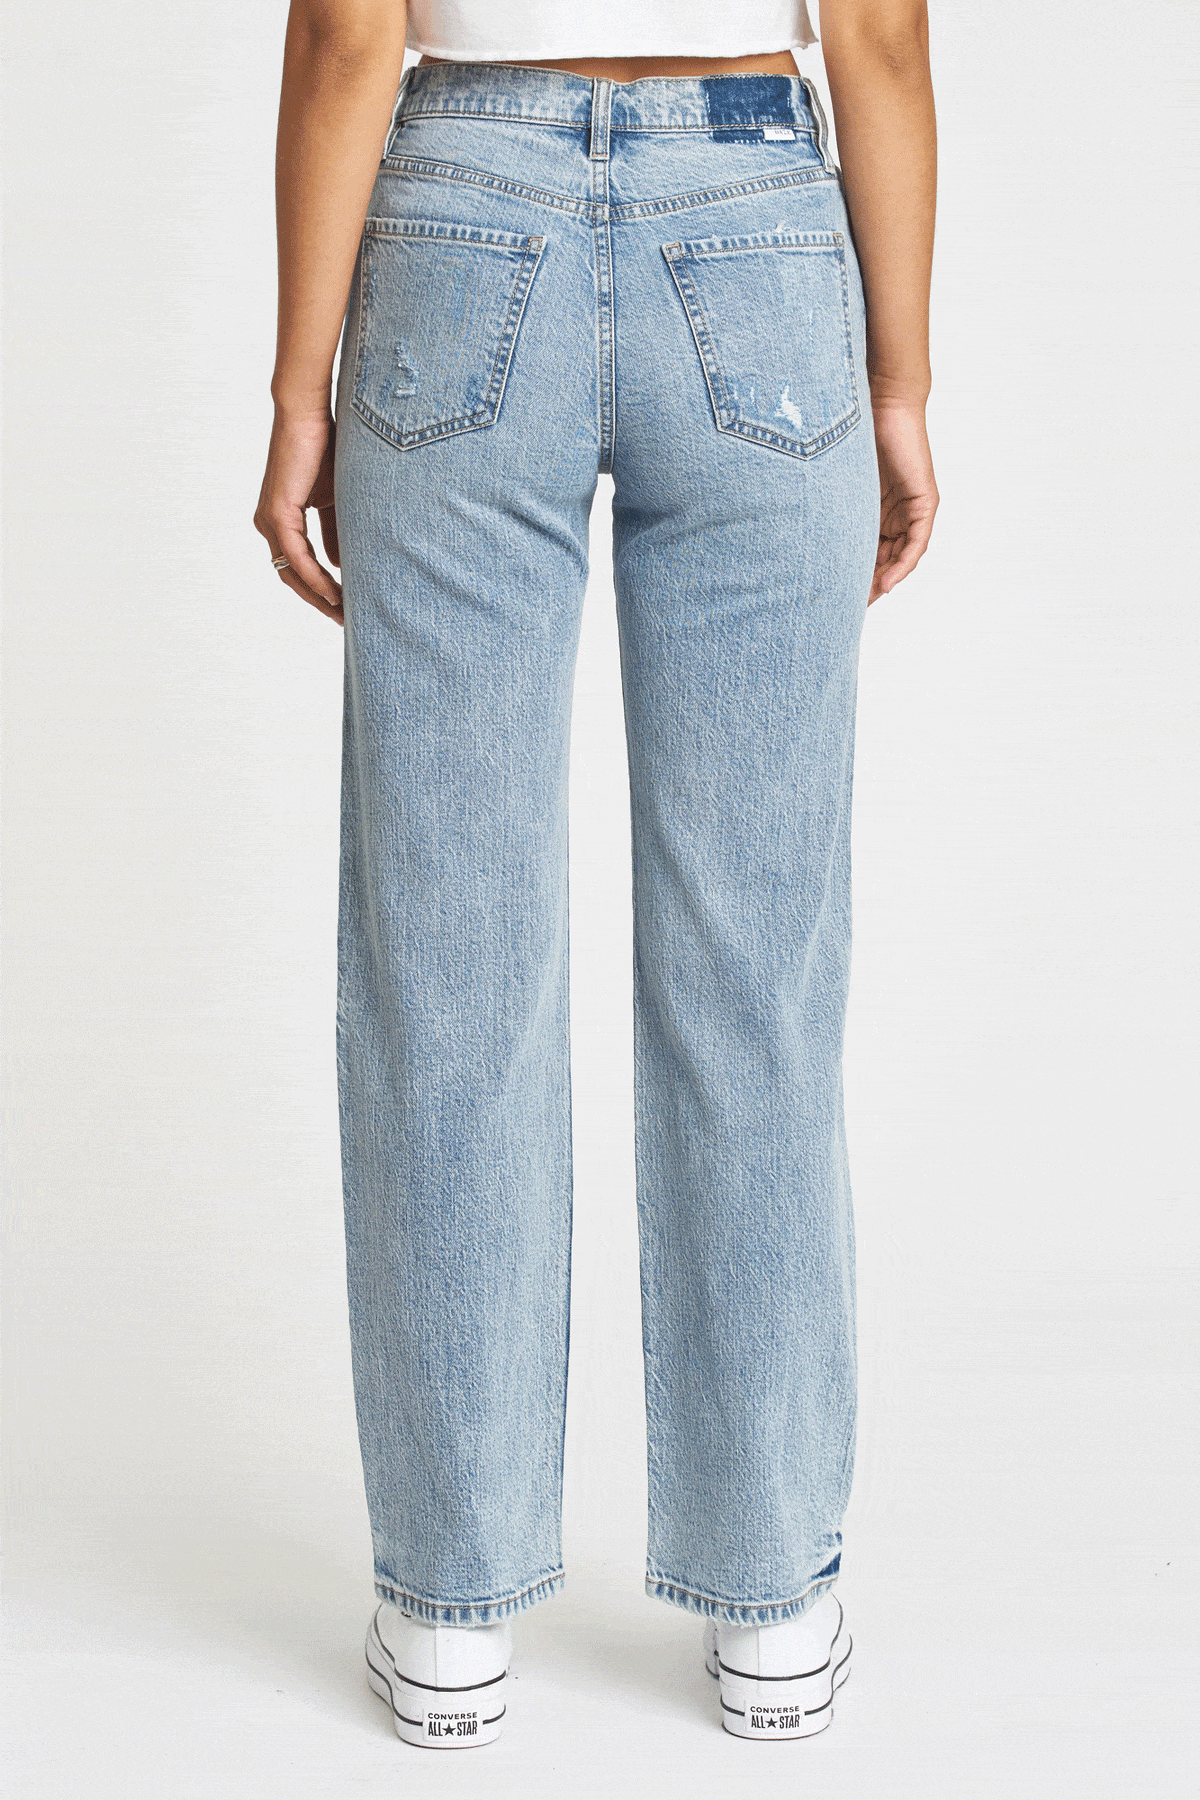 Sundaze High Rise Dad Jean in Skater Boy - Pants - Blooming Daily